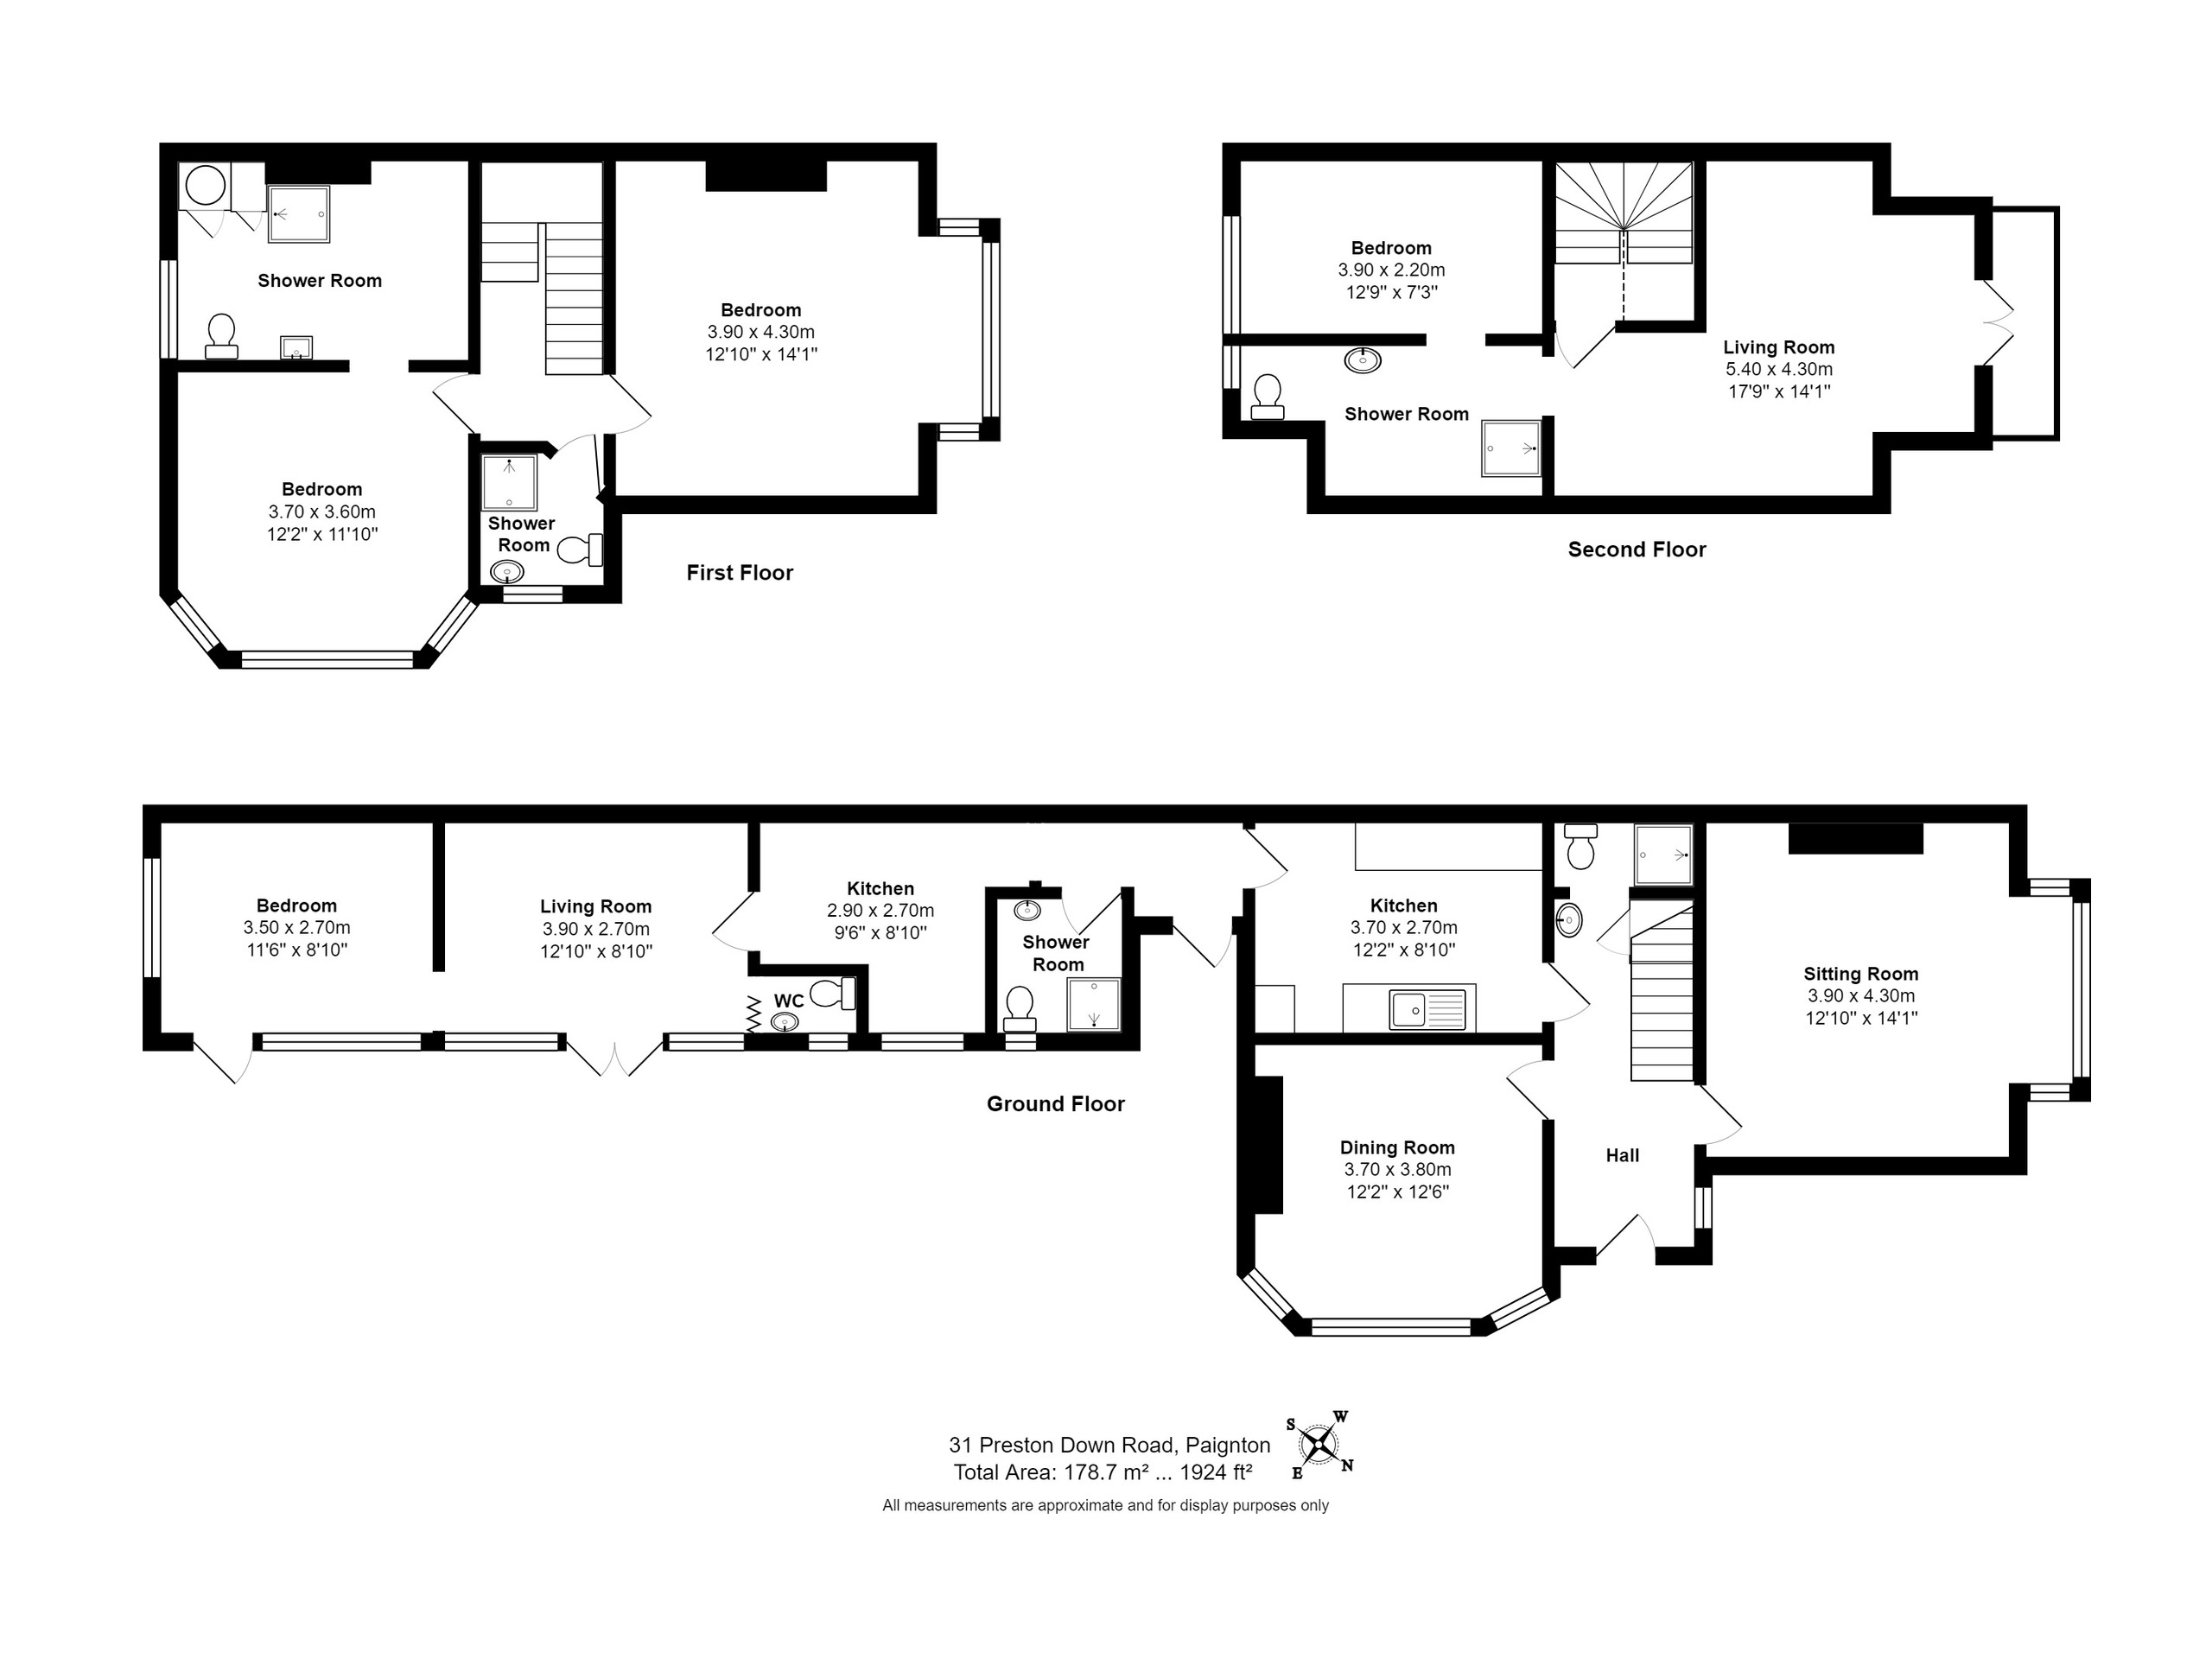 4 bed semi-detached house for sale in Preston Down Road, Paignton - Property floorplan